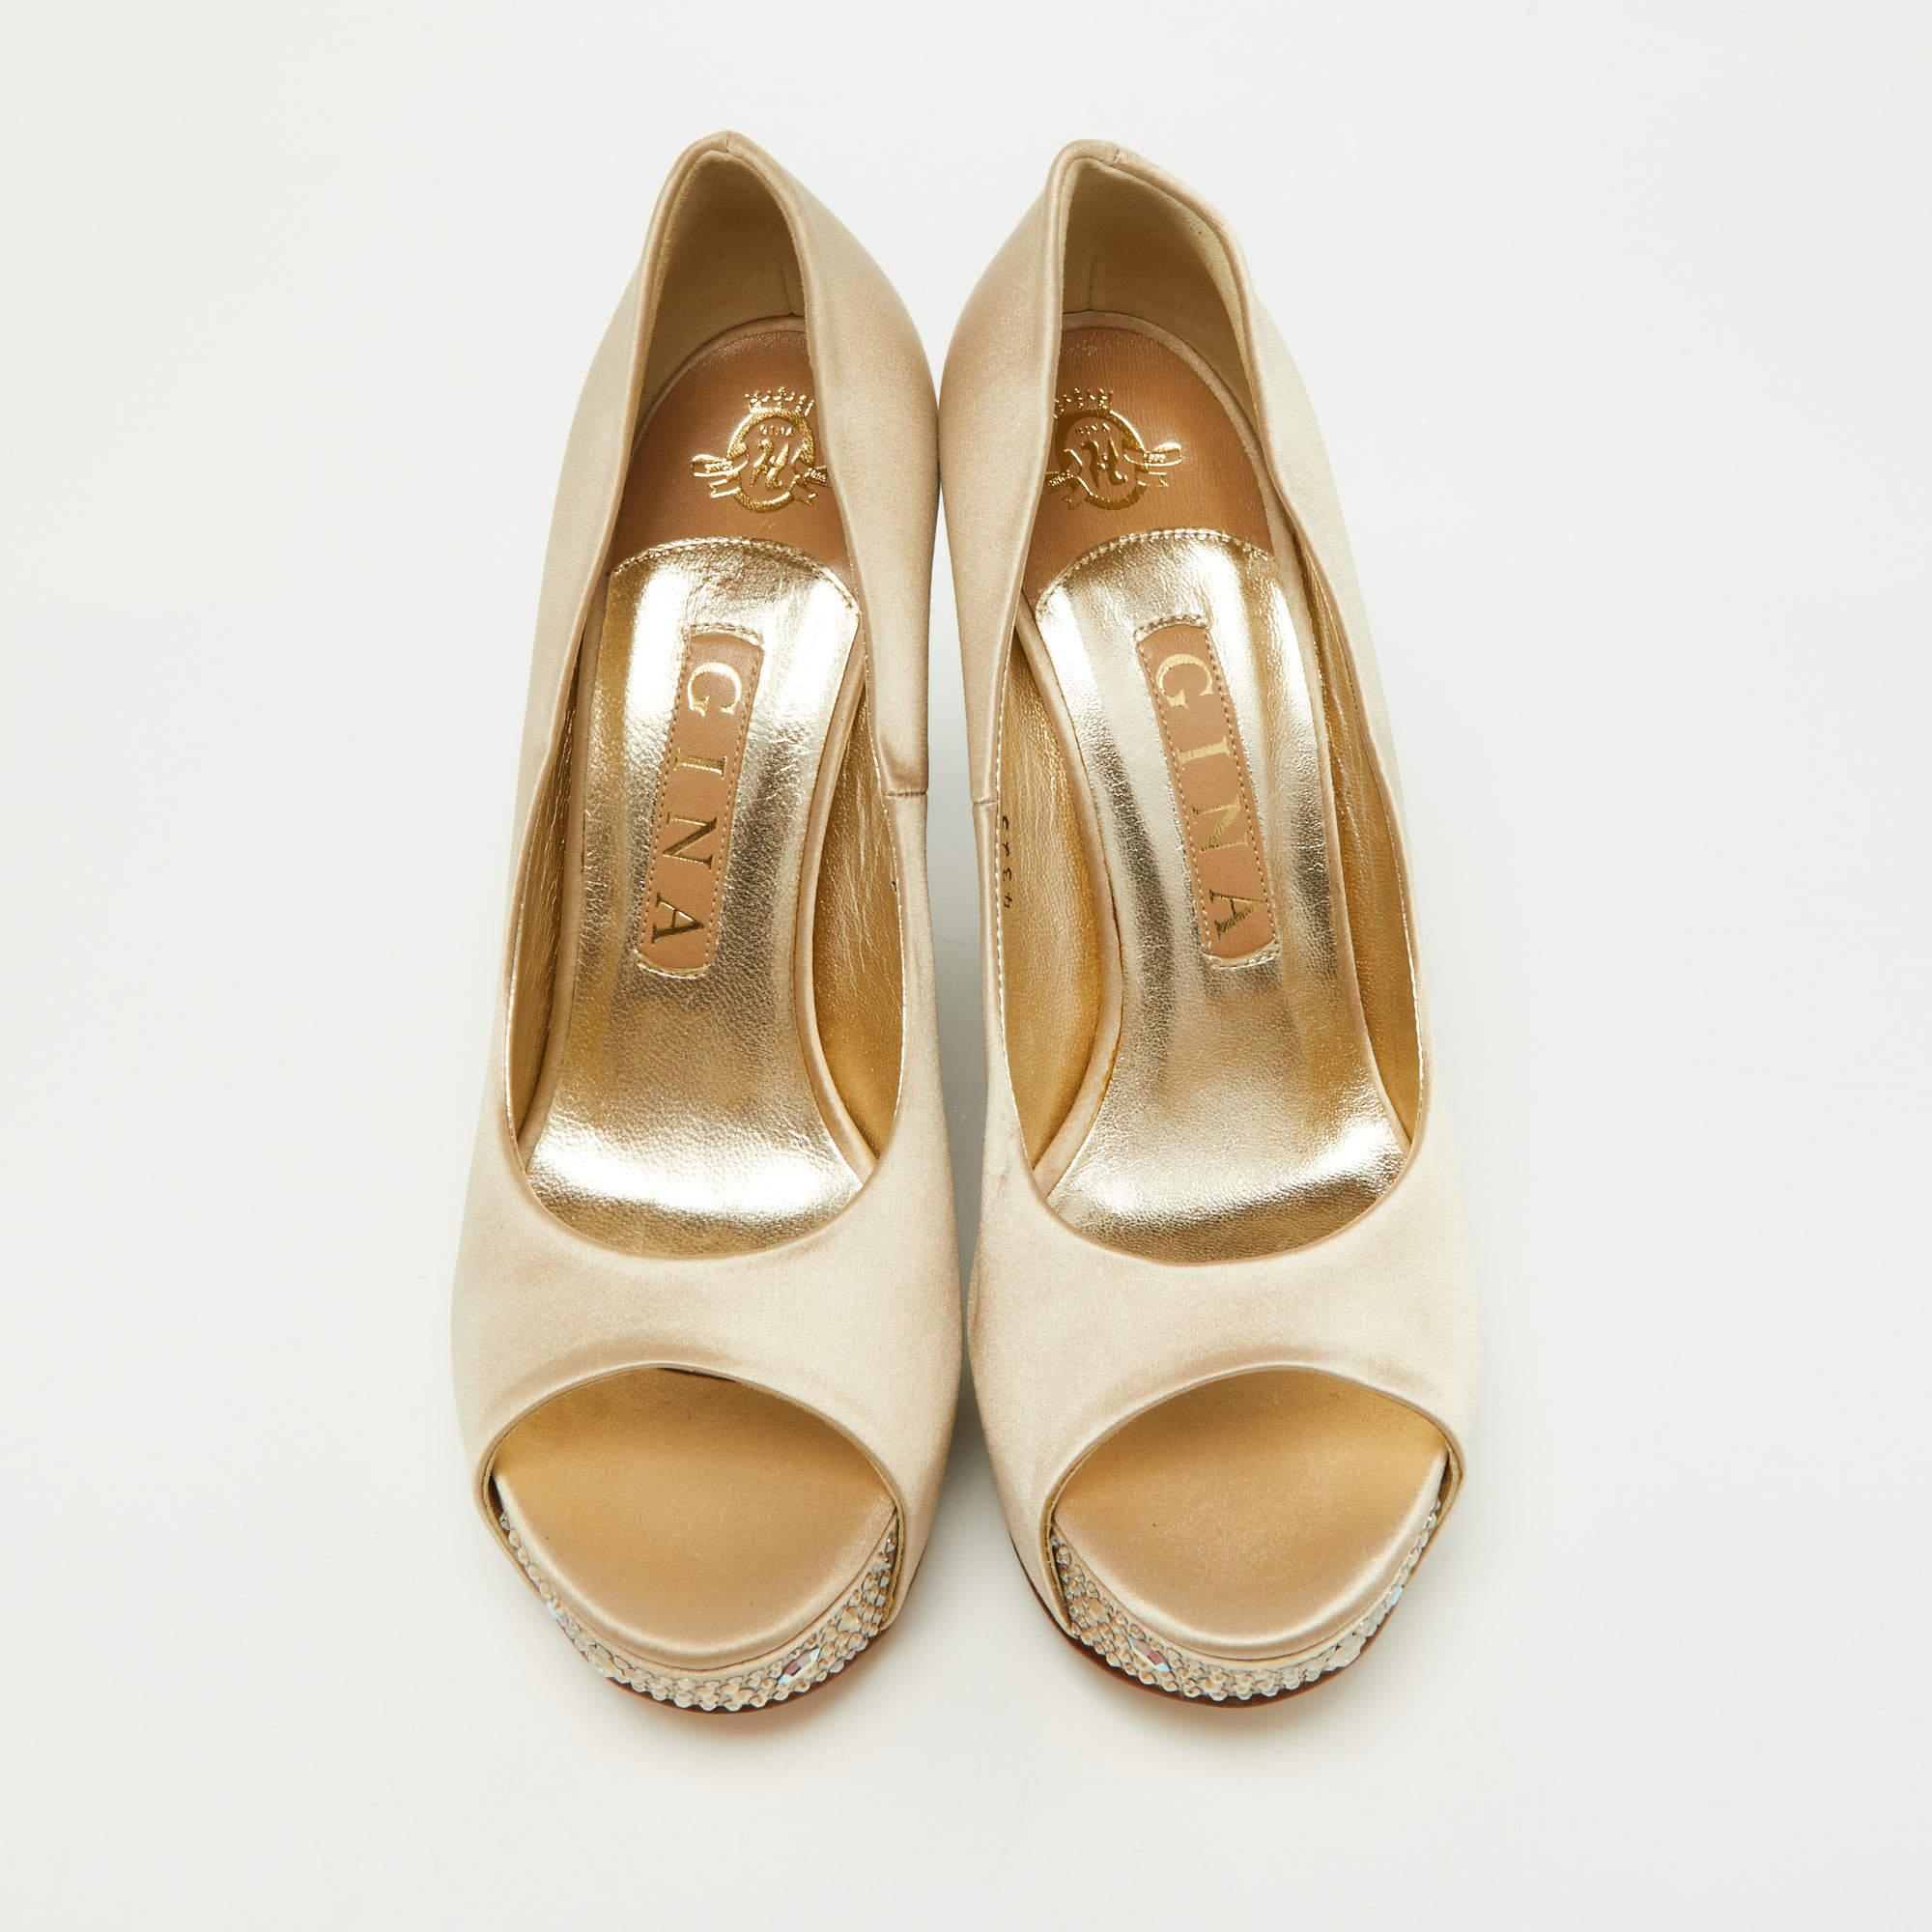 Gina Beige Crystal Embellished Satin Belle Open Toe Wedge Pumps Size 37 In New Condition For Sale In Dubai, Al Qouz 2